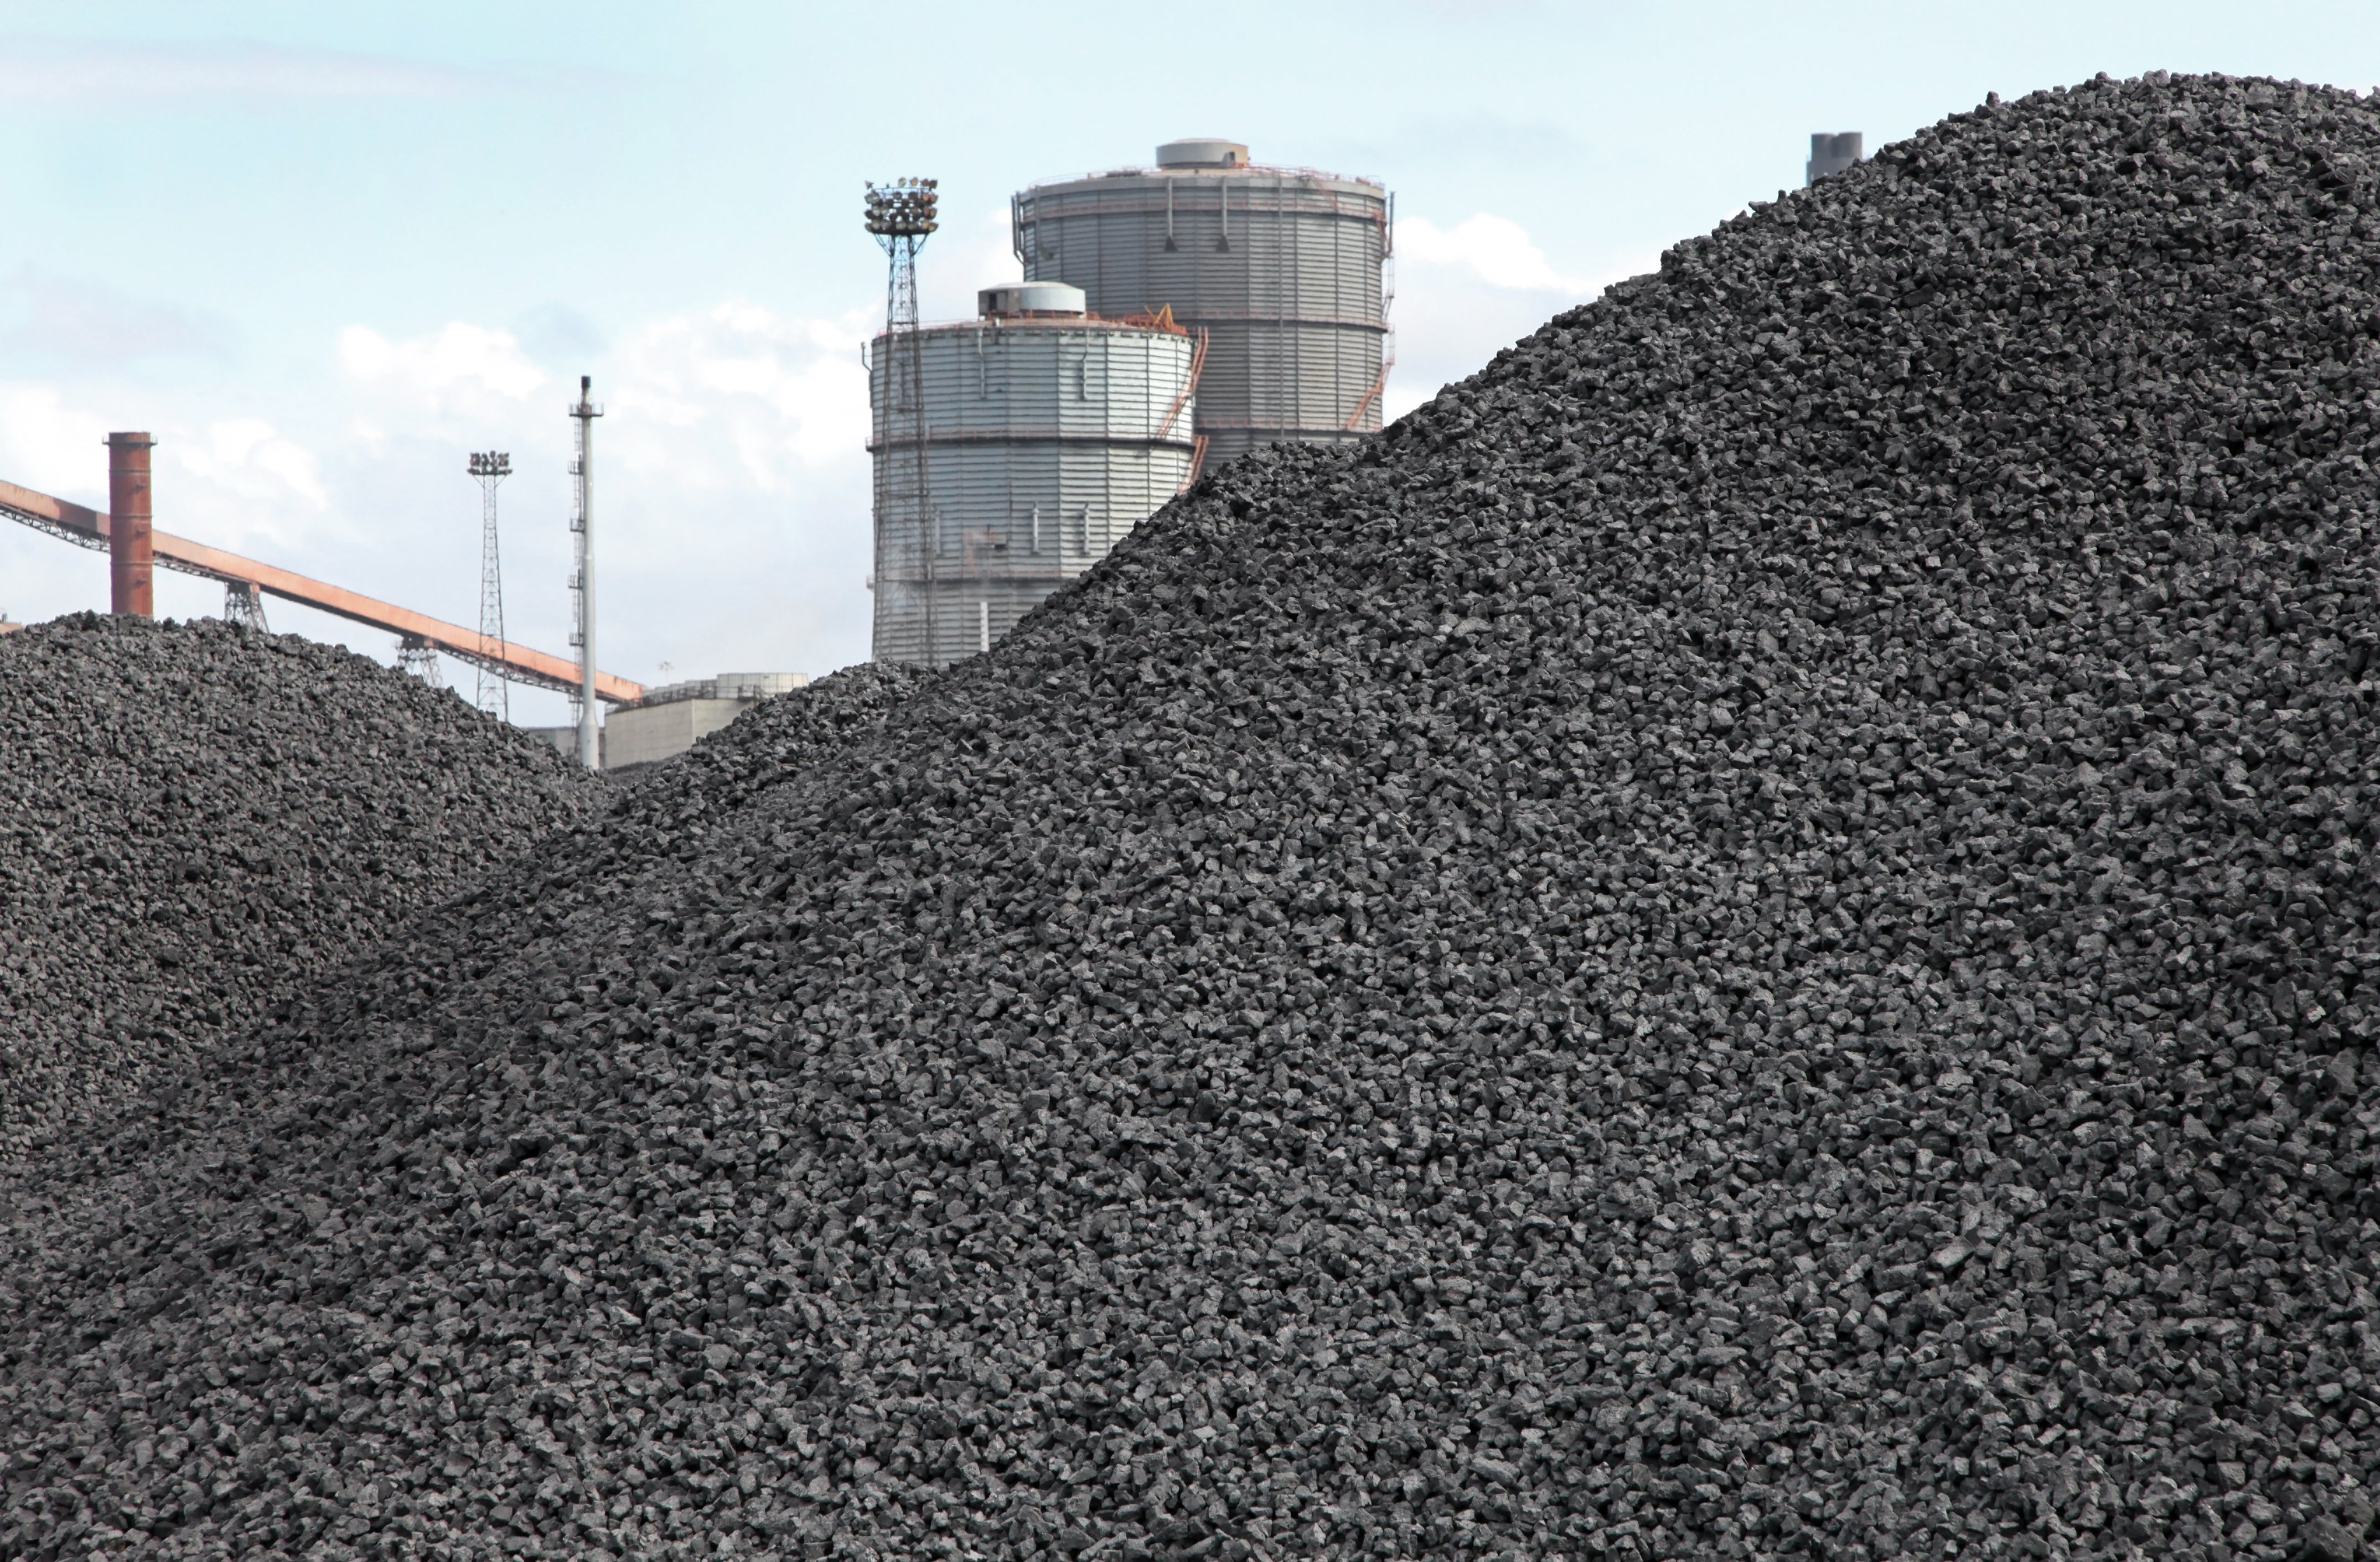 Stock piles of coking coal, used in steel production, at a steel-making plant